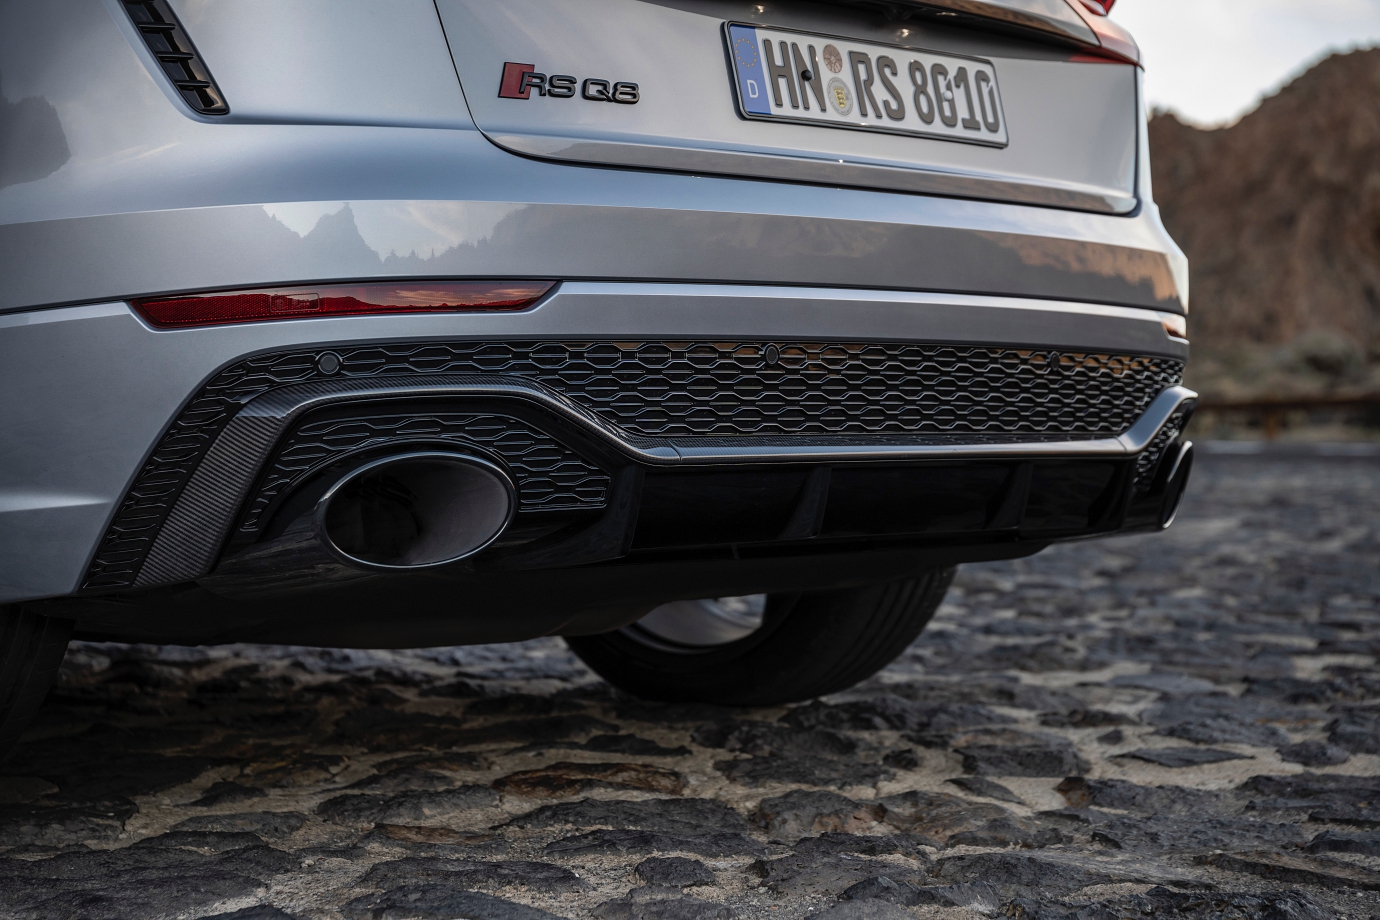 sports exhaust adds blackened tips to the oval tailpipes